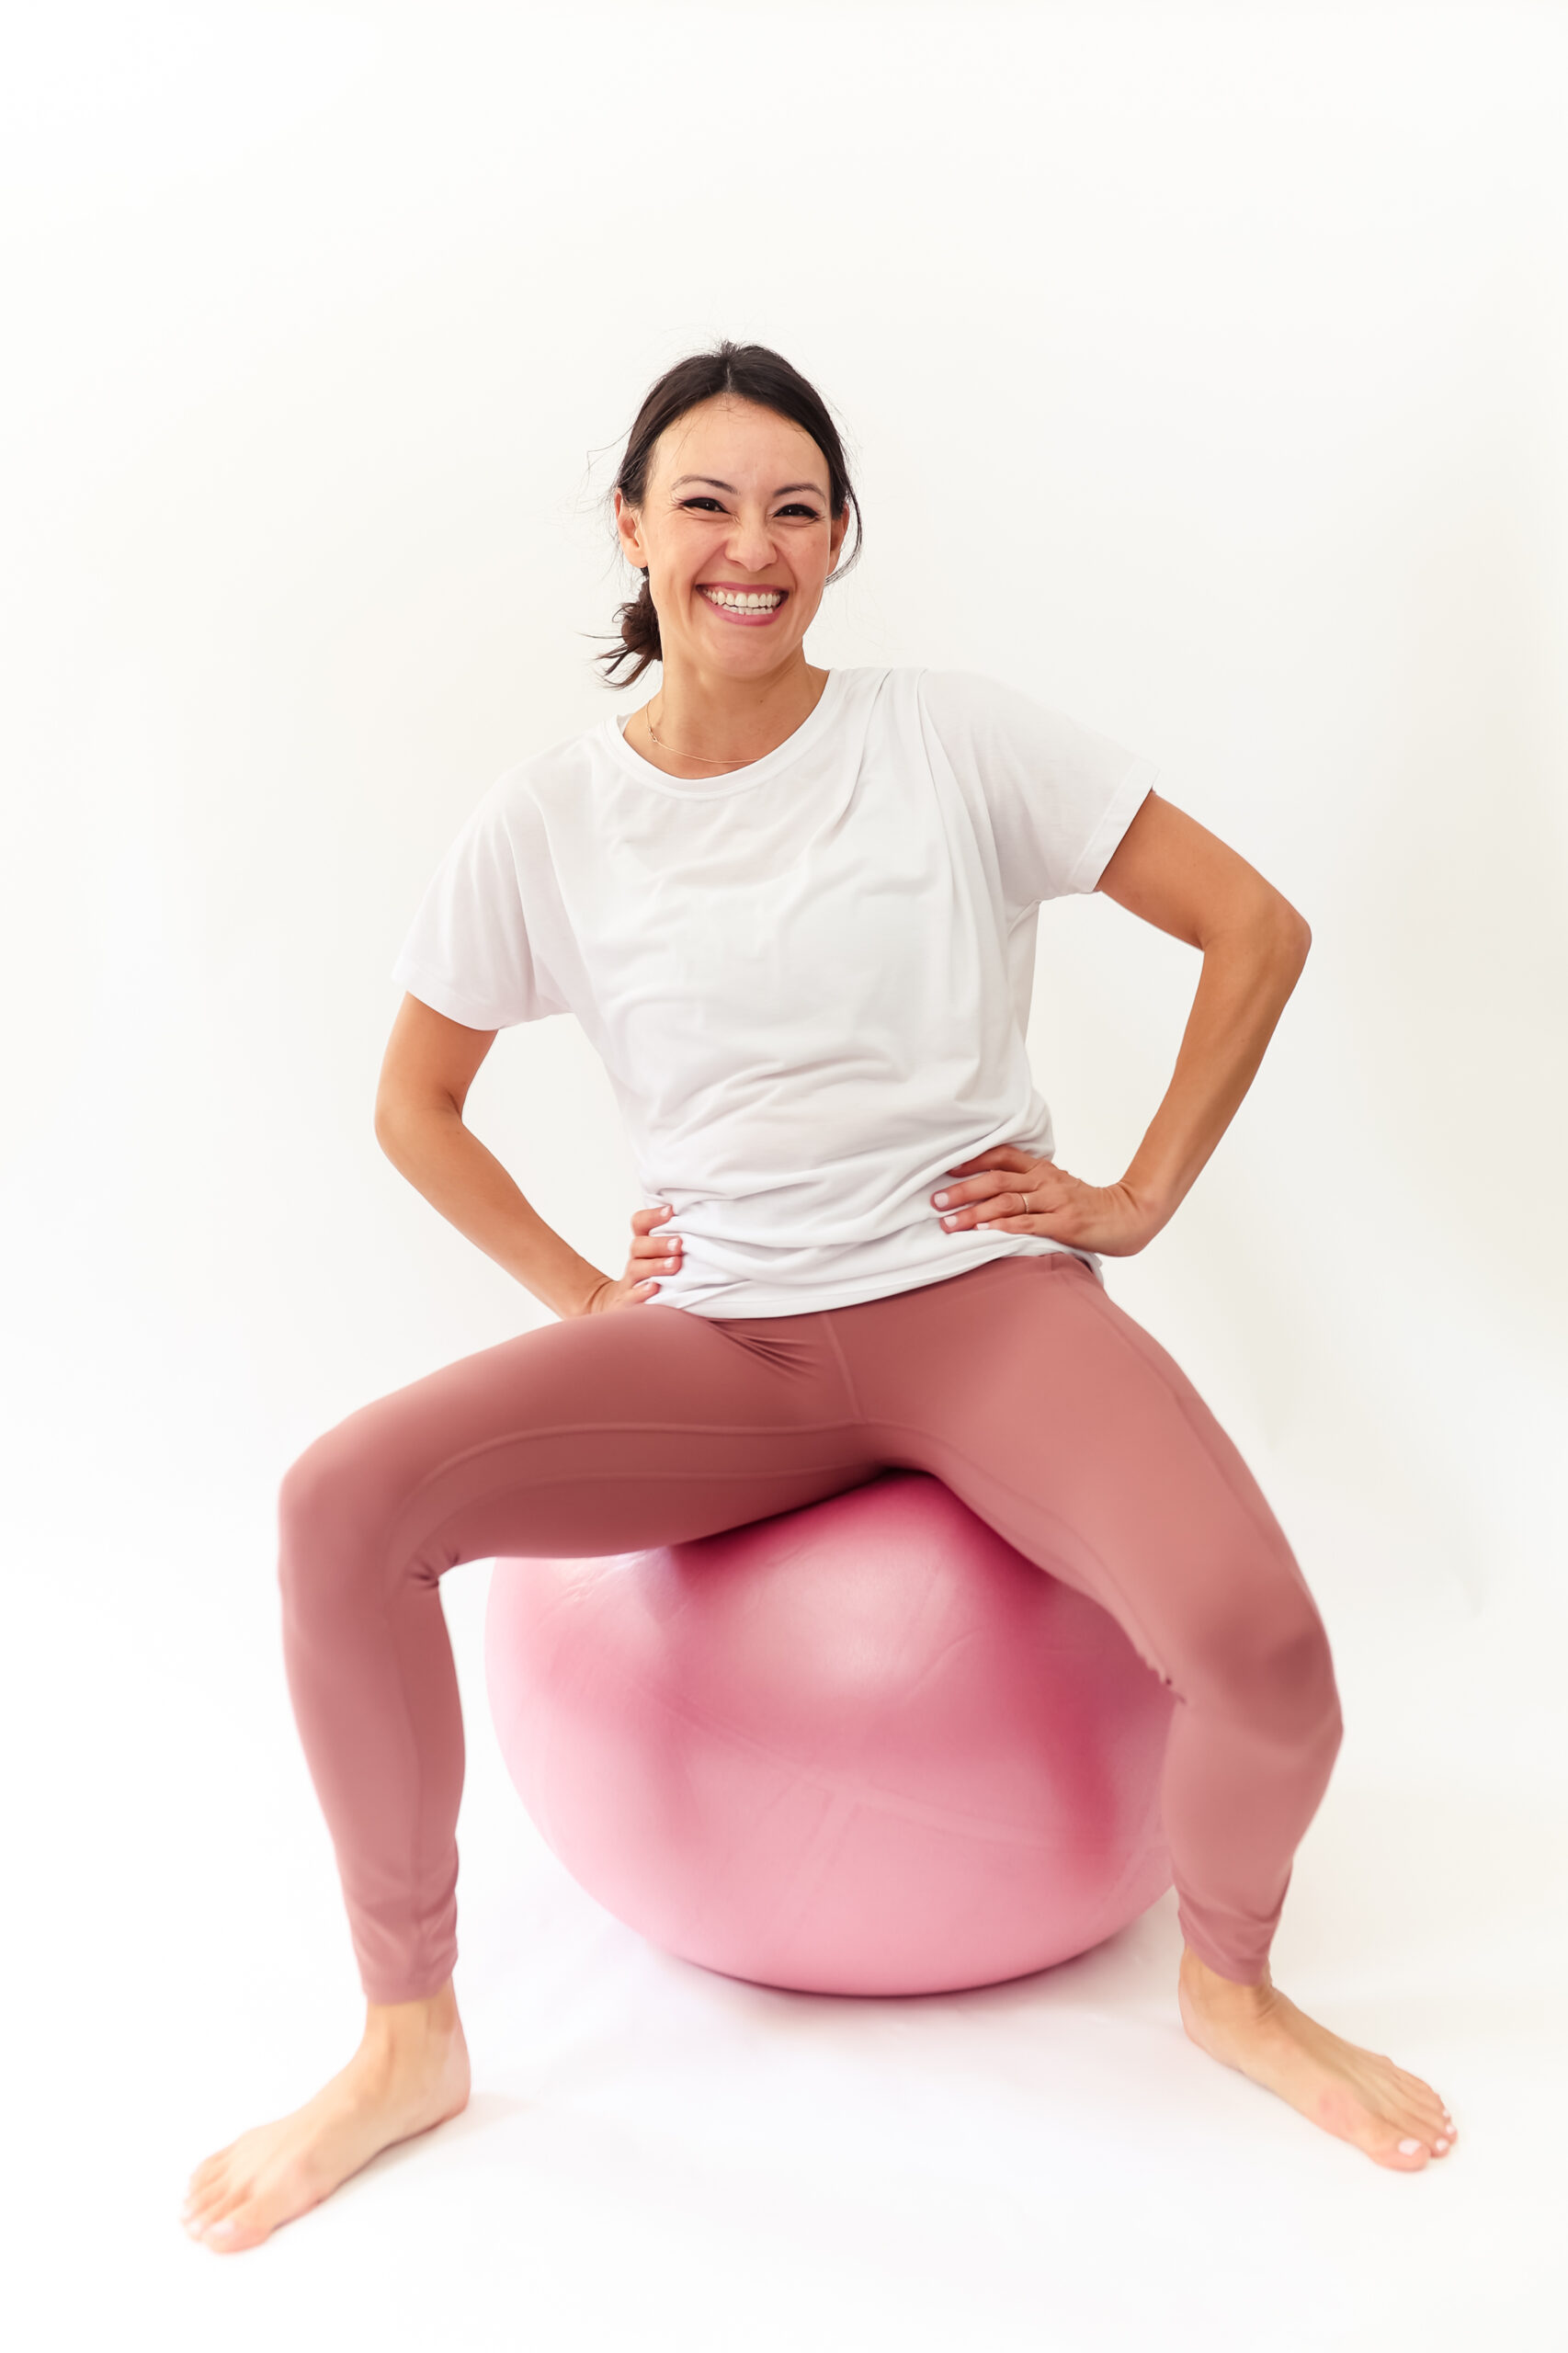 Woman sits on birth ball, smiling